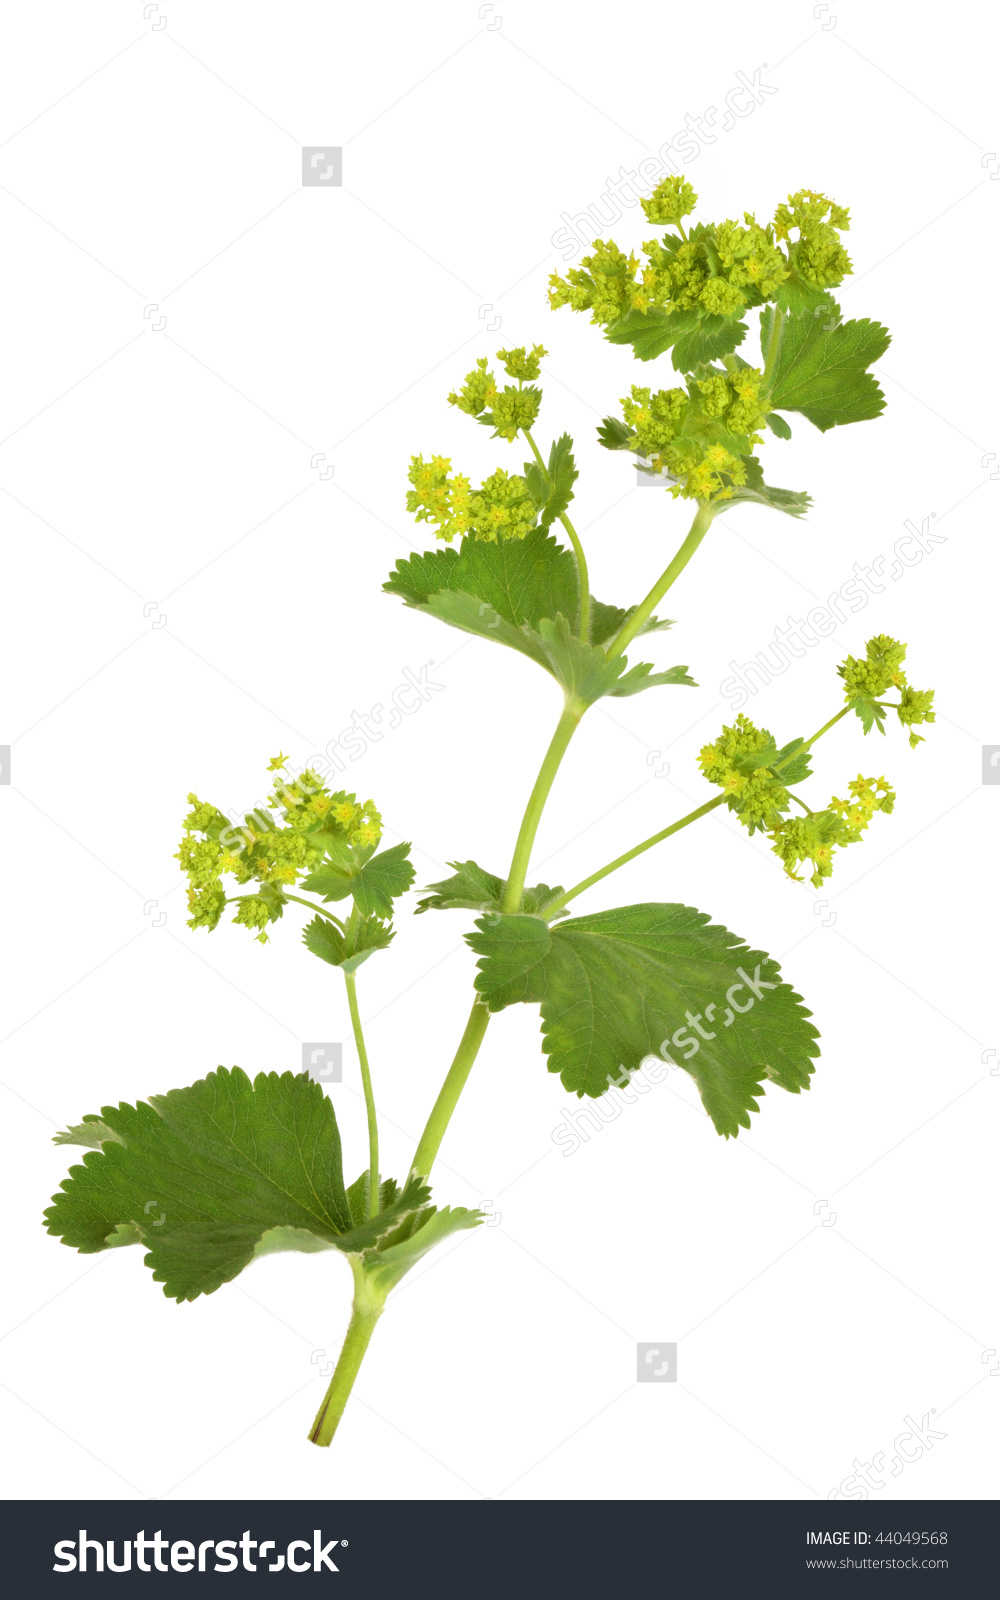 Ladys Mantle Herb Flowers Isolated Over Stock Photo 44049568.